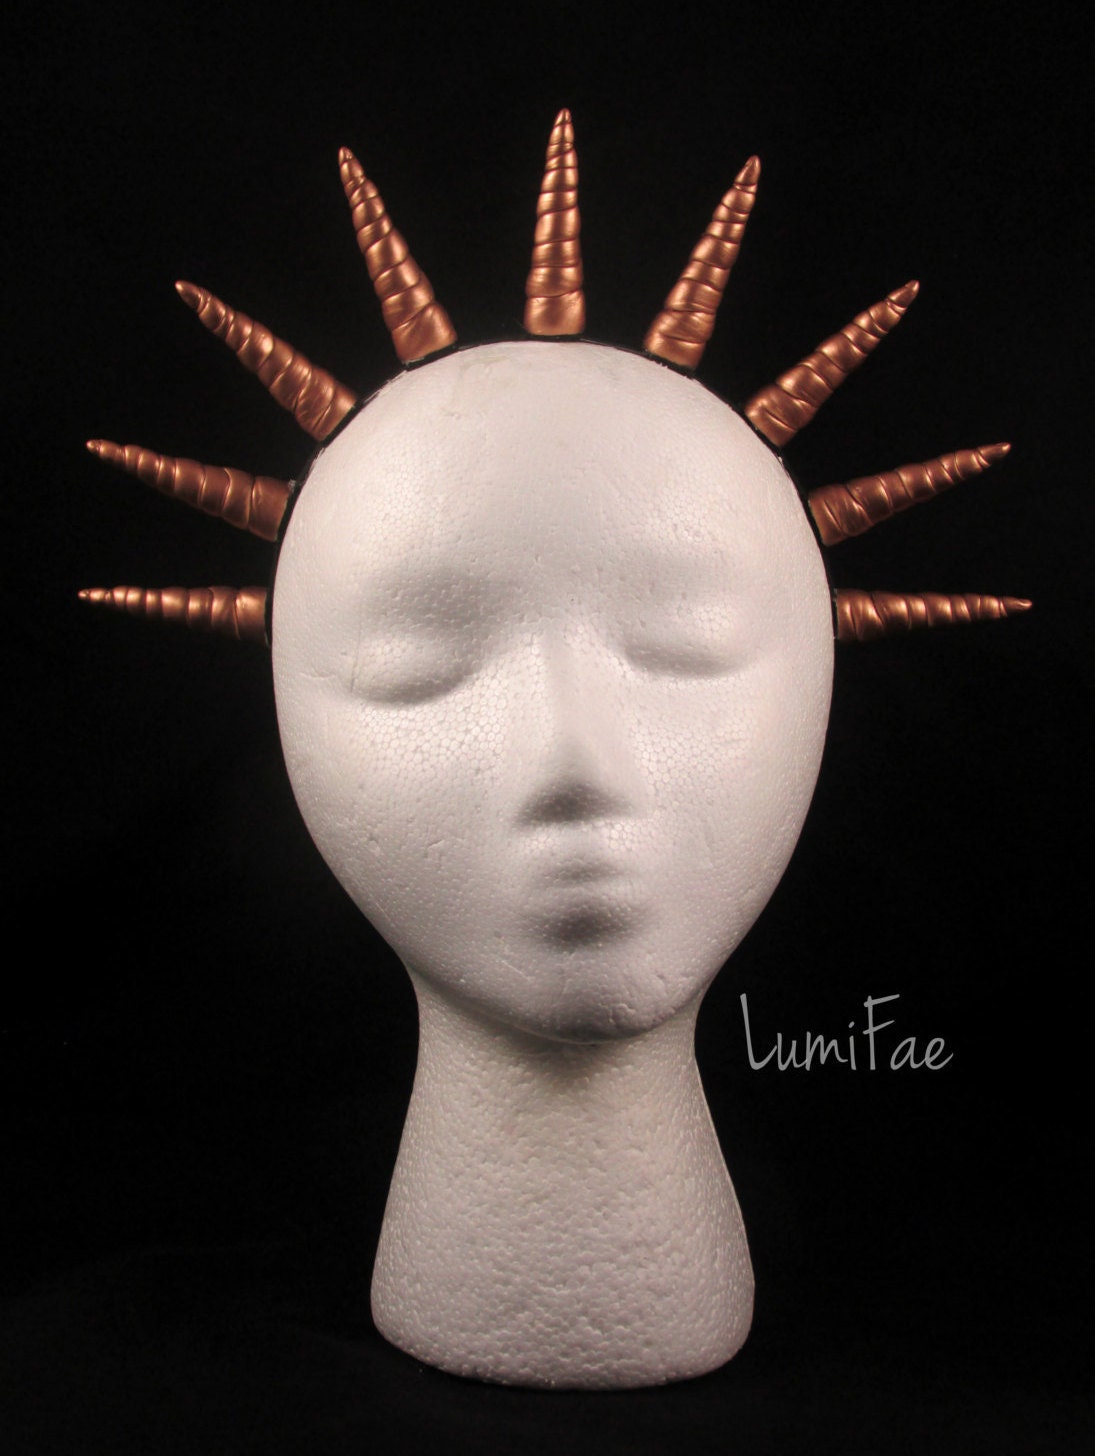 Mermaid Crown, Copper - Last One - Discontinued - Sale ends March 2nd